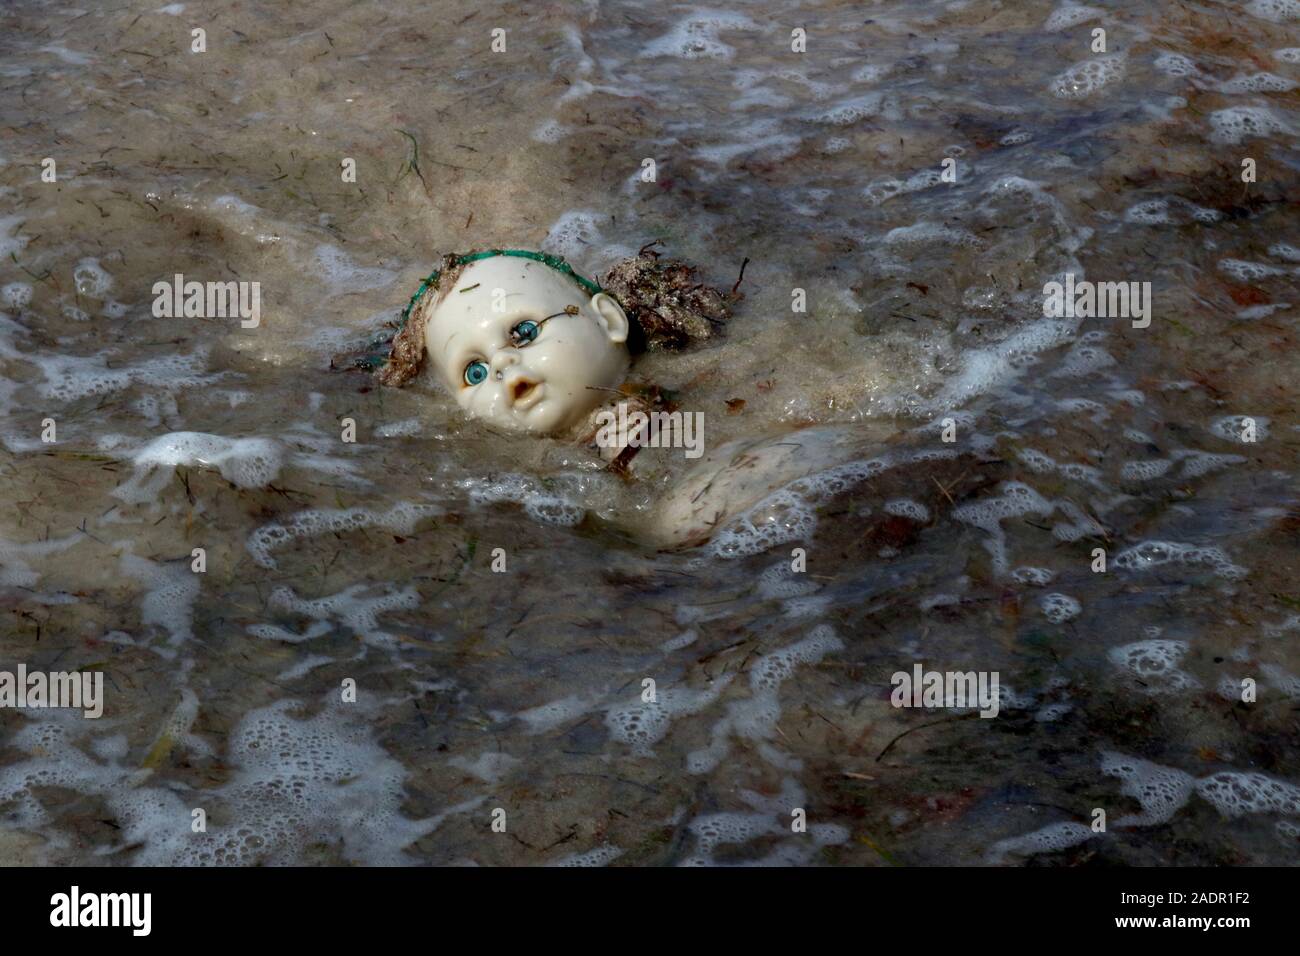 Discarded doll swallowed by polluted ocean Stock Photo